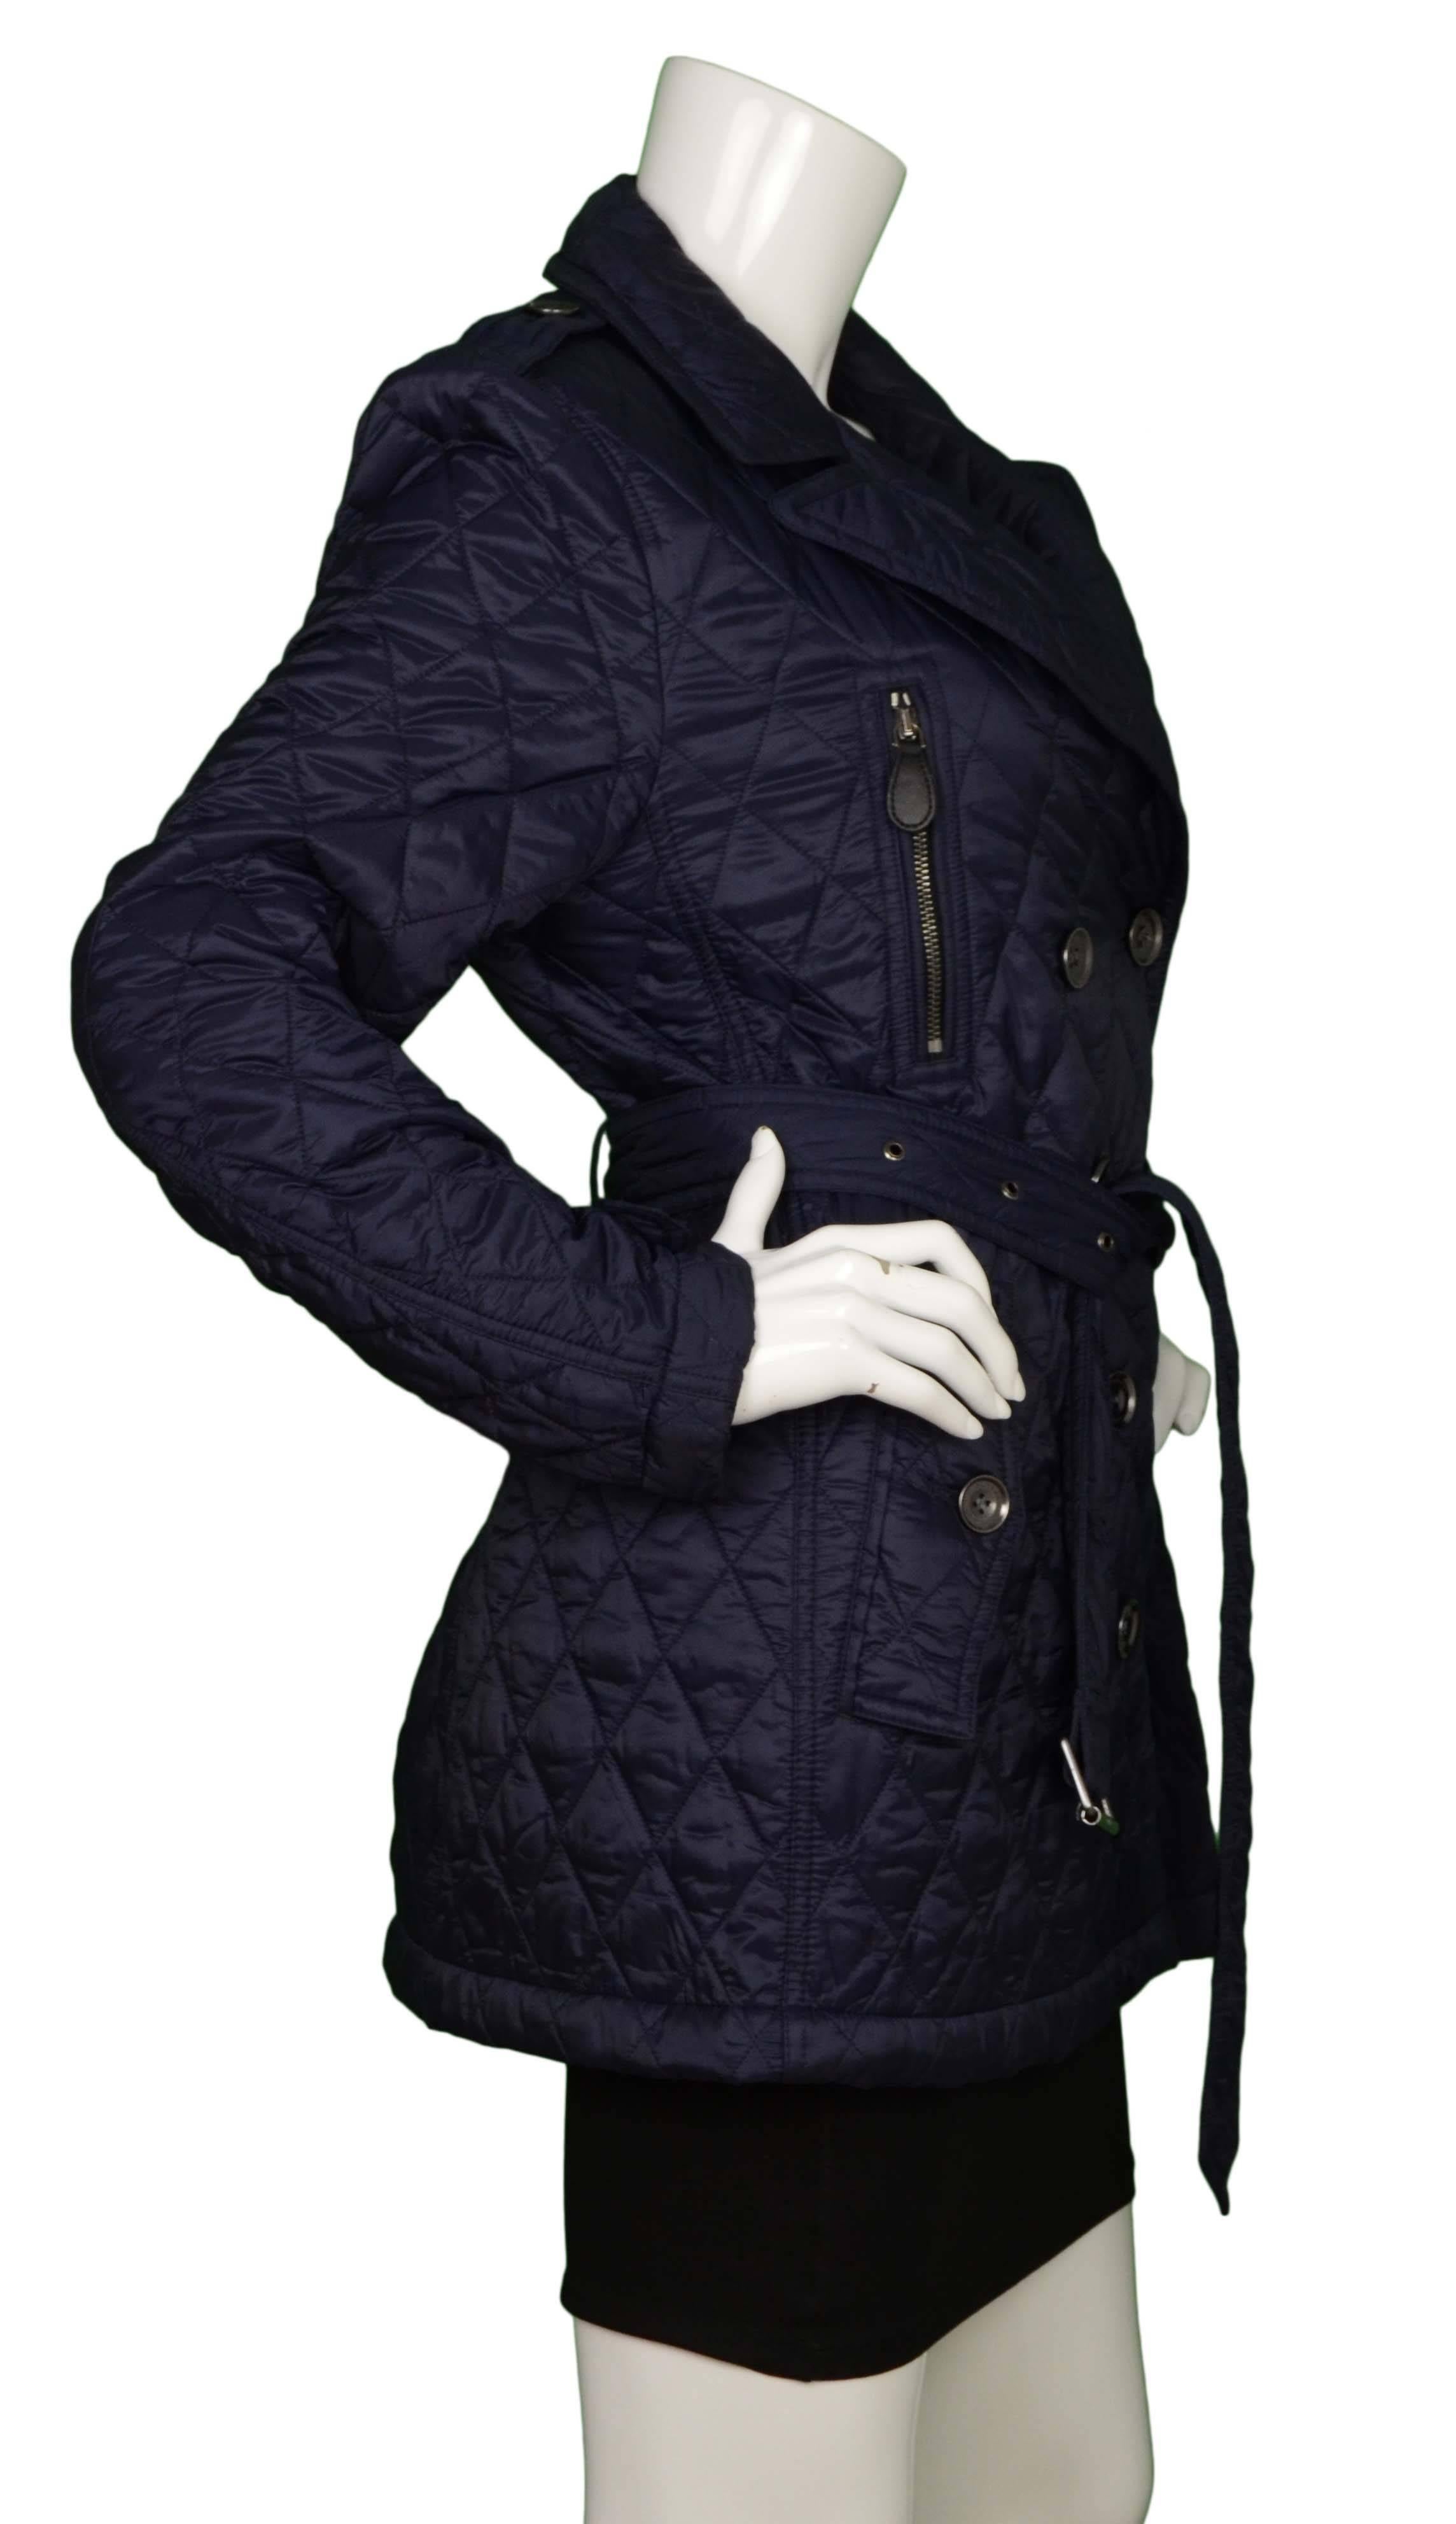 Burberry Brit Navy Quilted Nylon Jacket 
Features optional waist belt
Made In: China
Color: Navy
Composition: 100% polyester
Lining: Navy & black plaid, 100% polyester
Closure/Opening: Double breasted button down closure
Exterior Pockets: Two